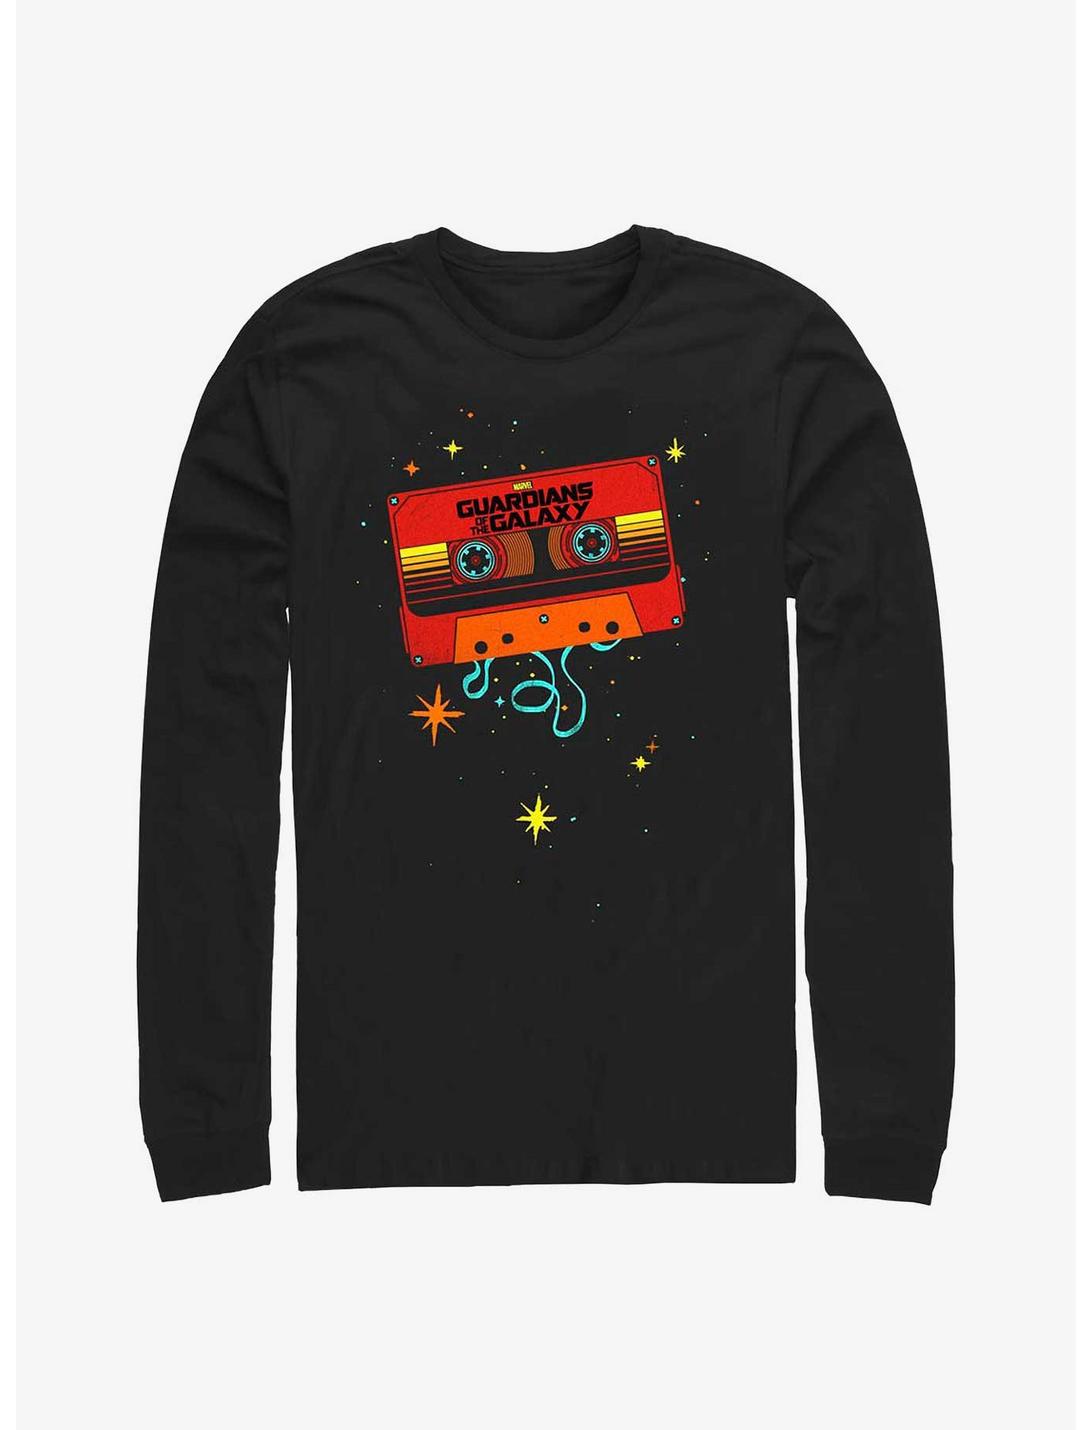 Marvel Guardians Of The Galaxy Cassette Tape Long Sleeve T-Shirt, BLACK, hi-res